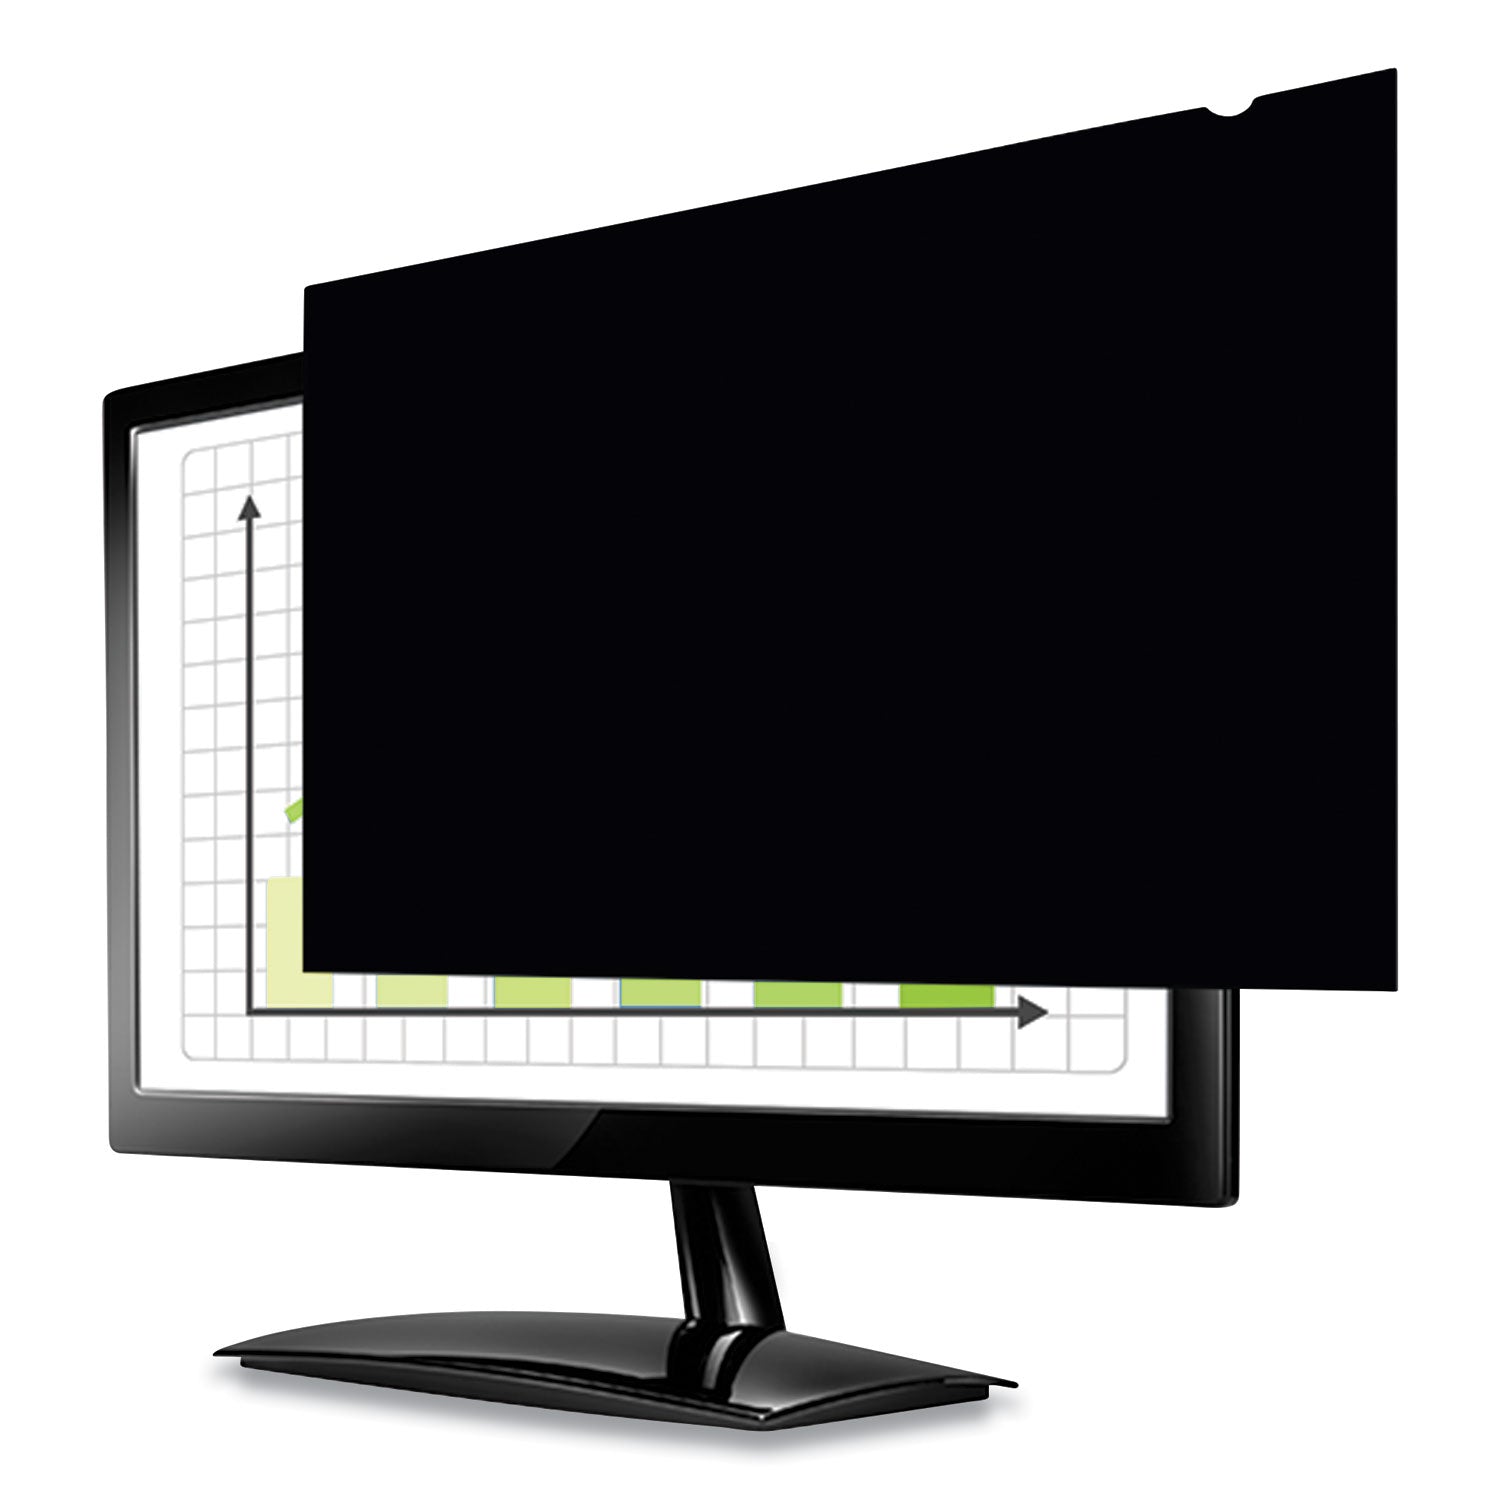 PrivaScreen Blackout Privacy Filter for 24" Widescreen Flat Panel Monitor, 16:10 Aspect Ratio - 